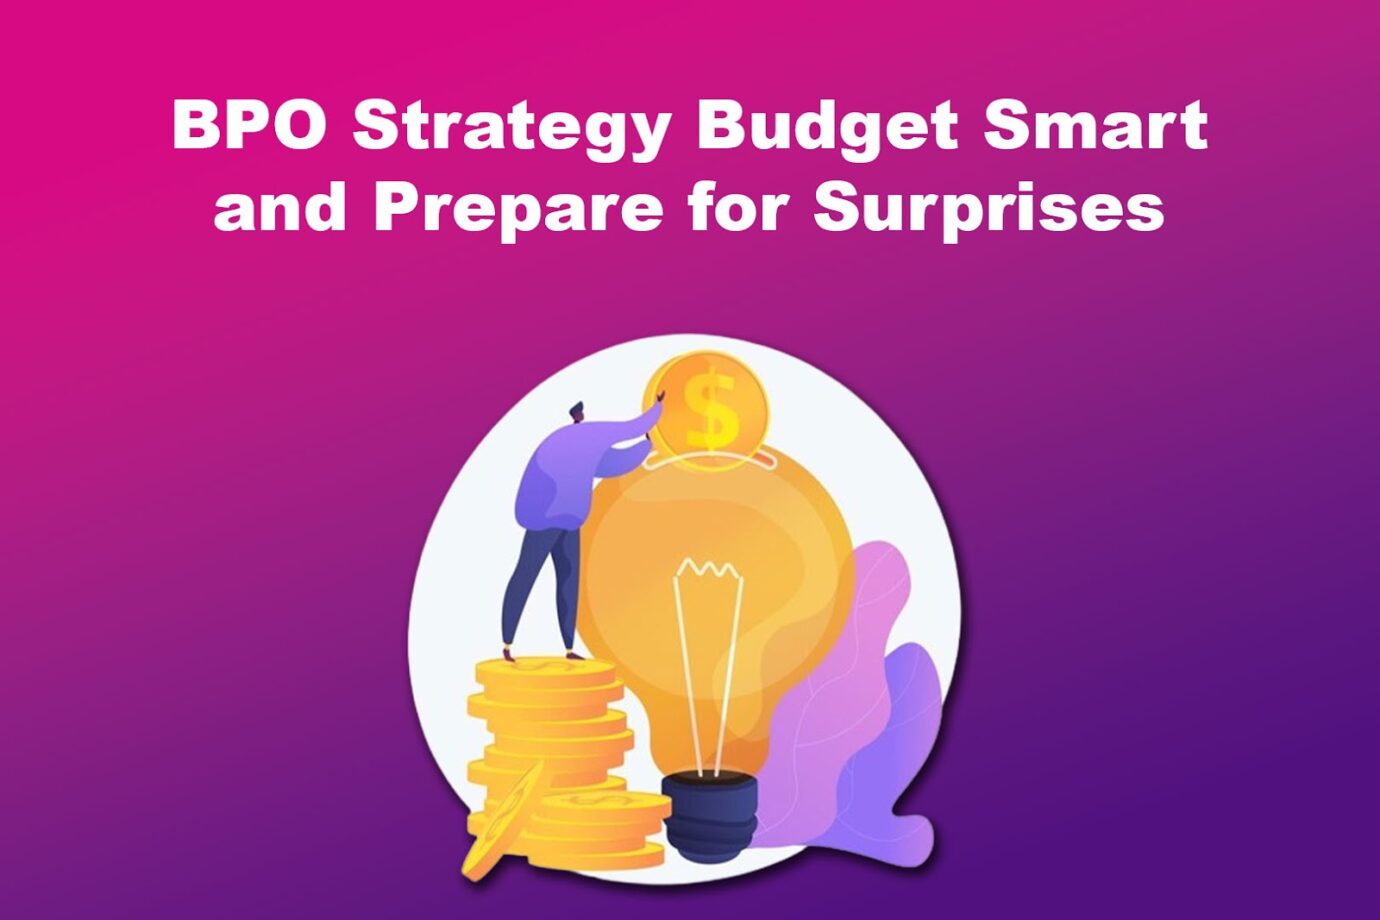 BPO Strategy Budget Smart and Prepare for Surprises